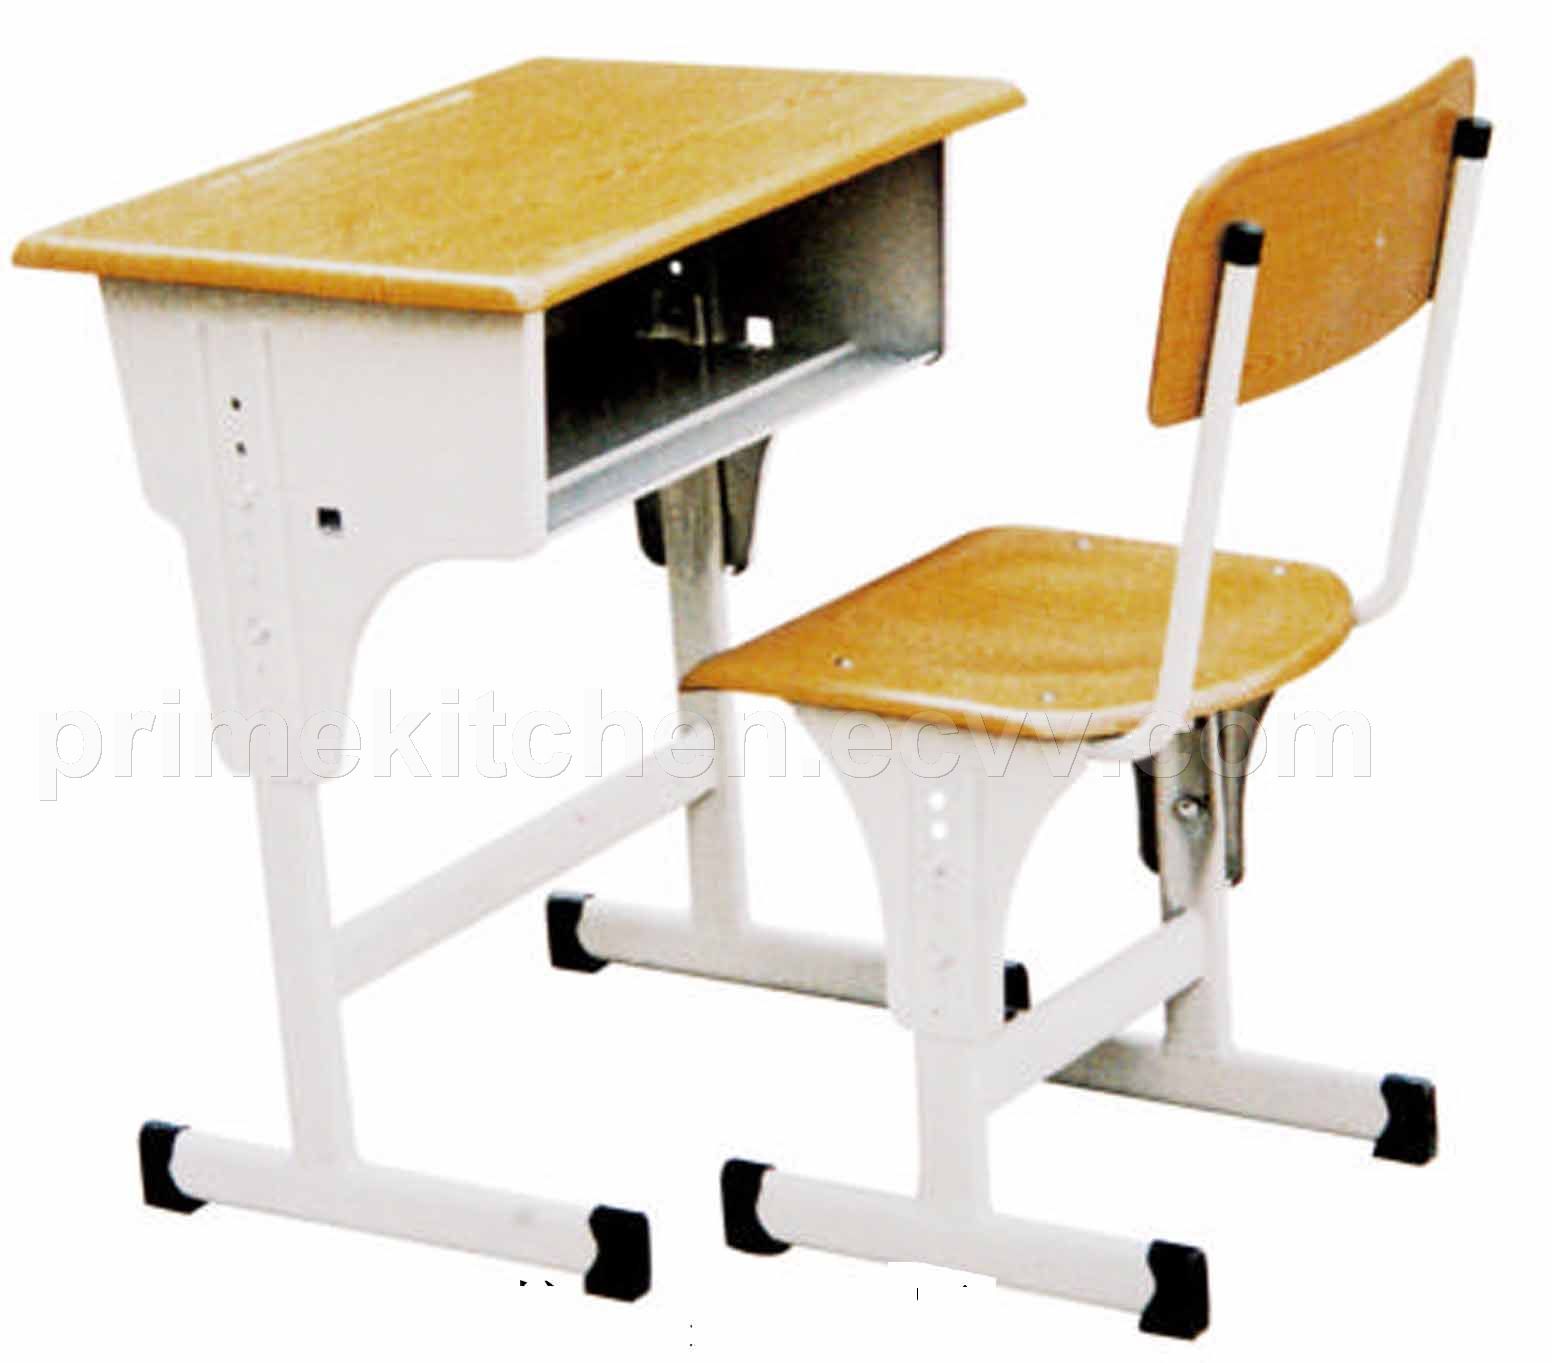 School Chair and desk